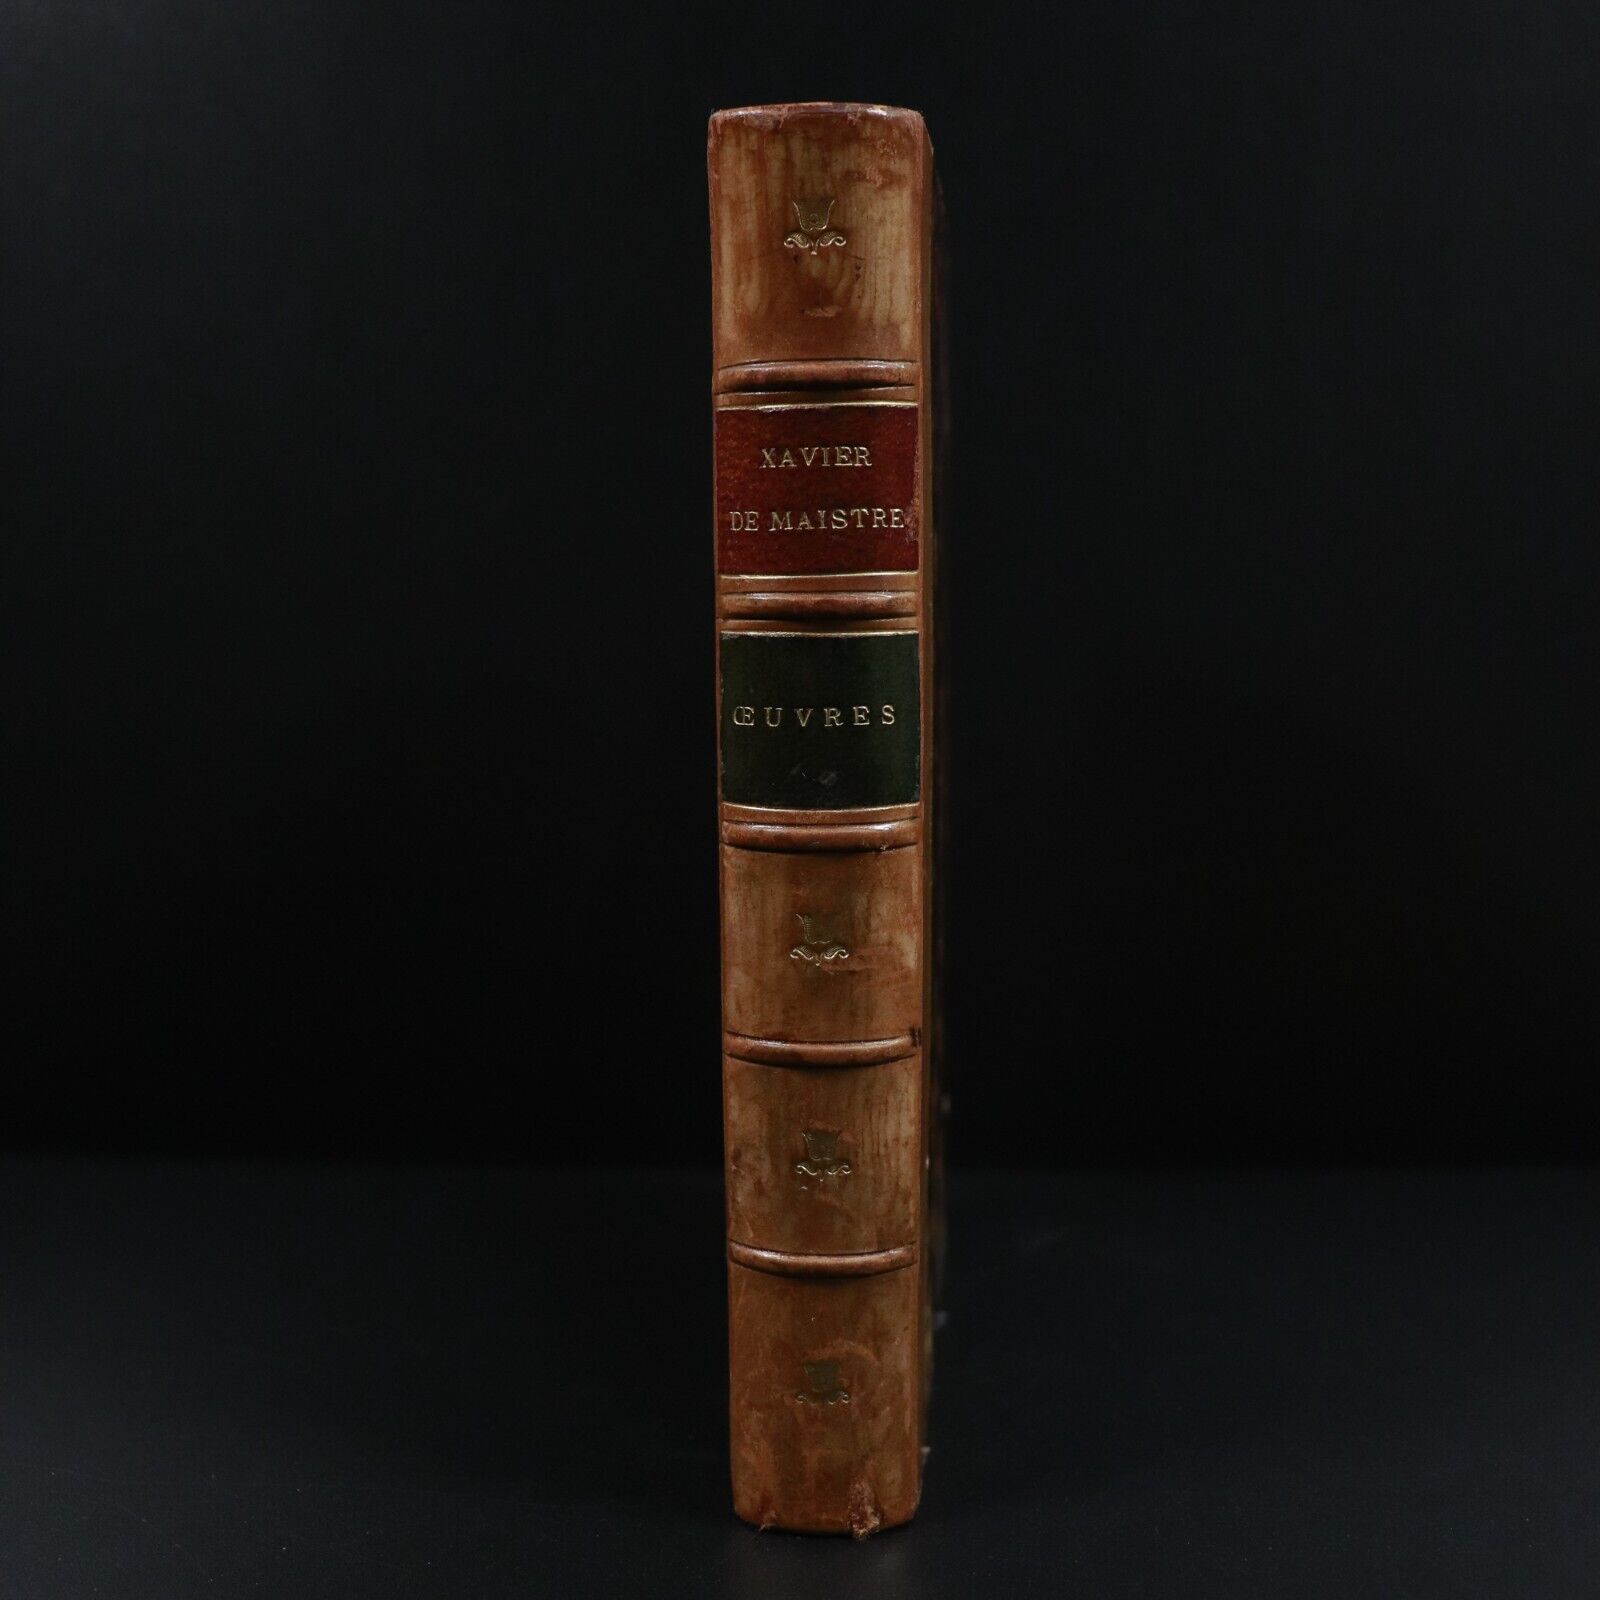 1870 Oeuvres Completes Du Conte Xavier De Maistre Antiquarian French Book